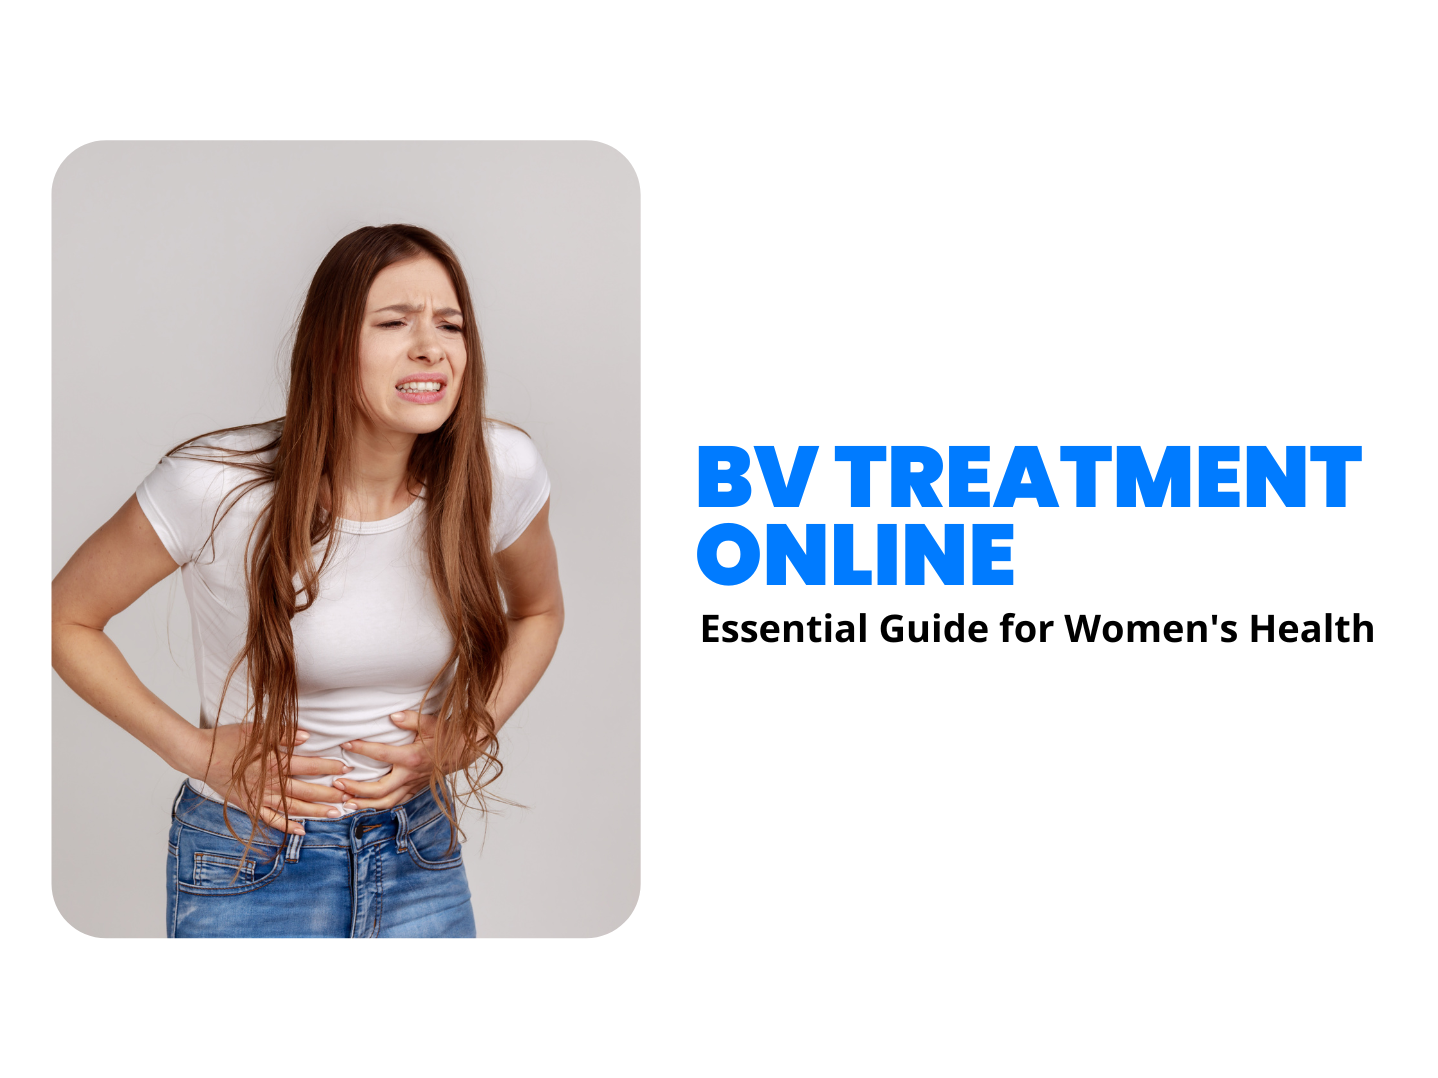 BV Treatment Online: Essential Guide for Women's Health